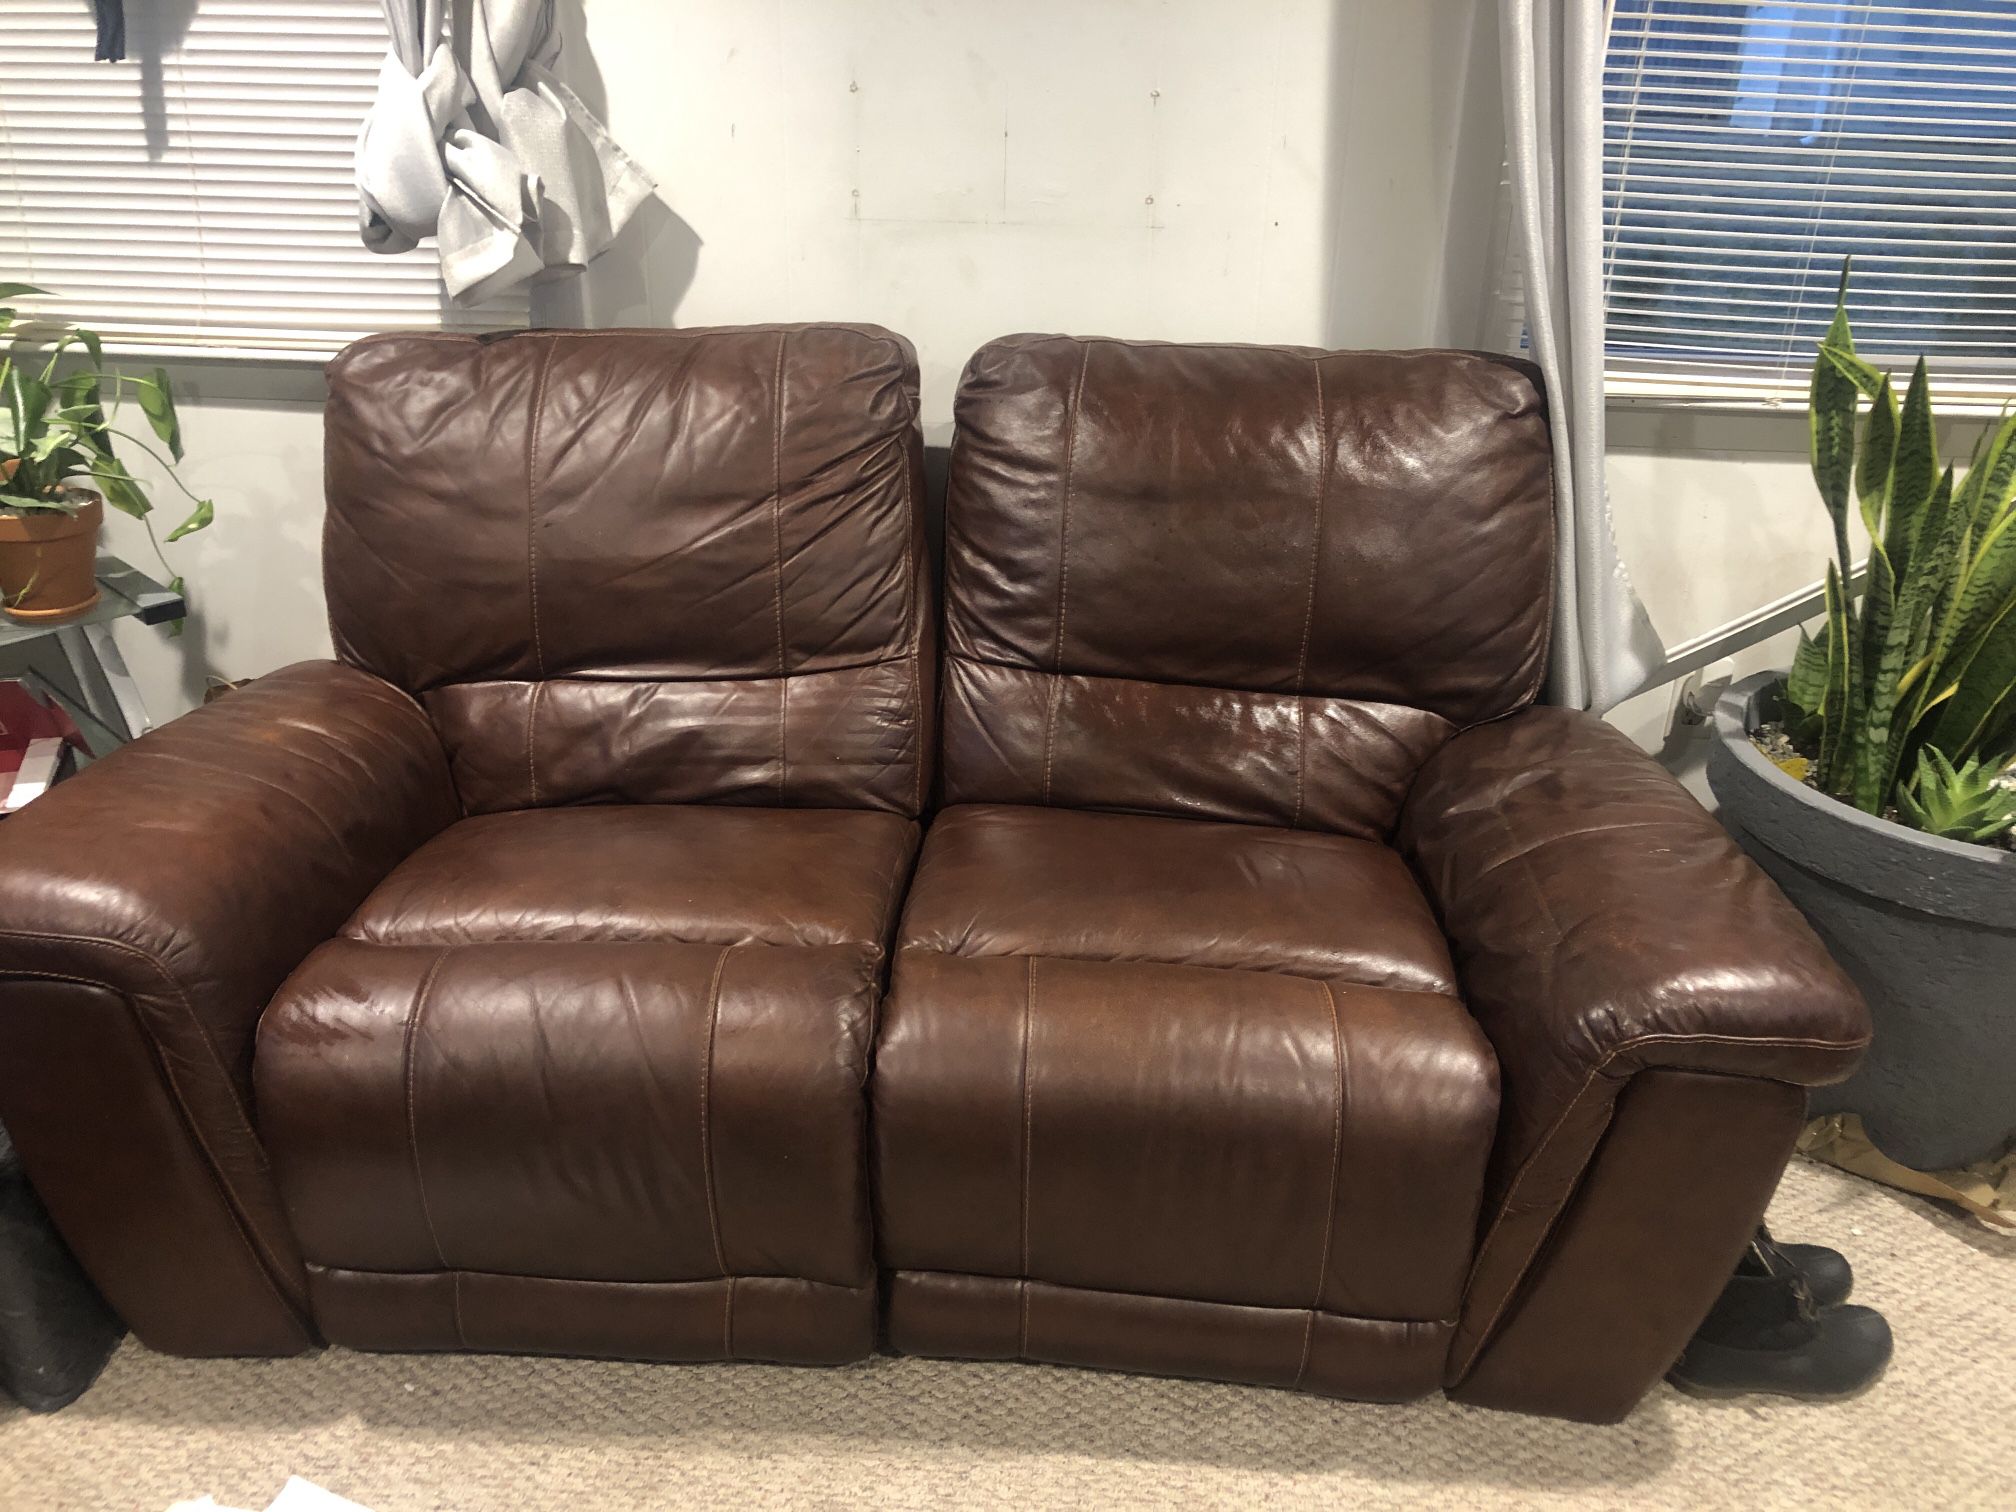 Free Couches - Originally From Cardis / Recliners/ Real Leather 